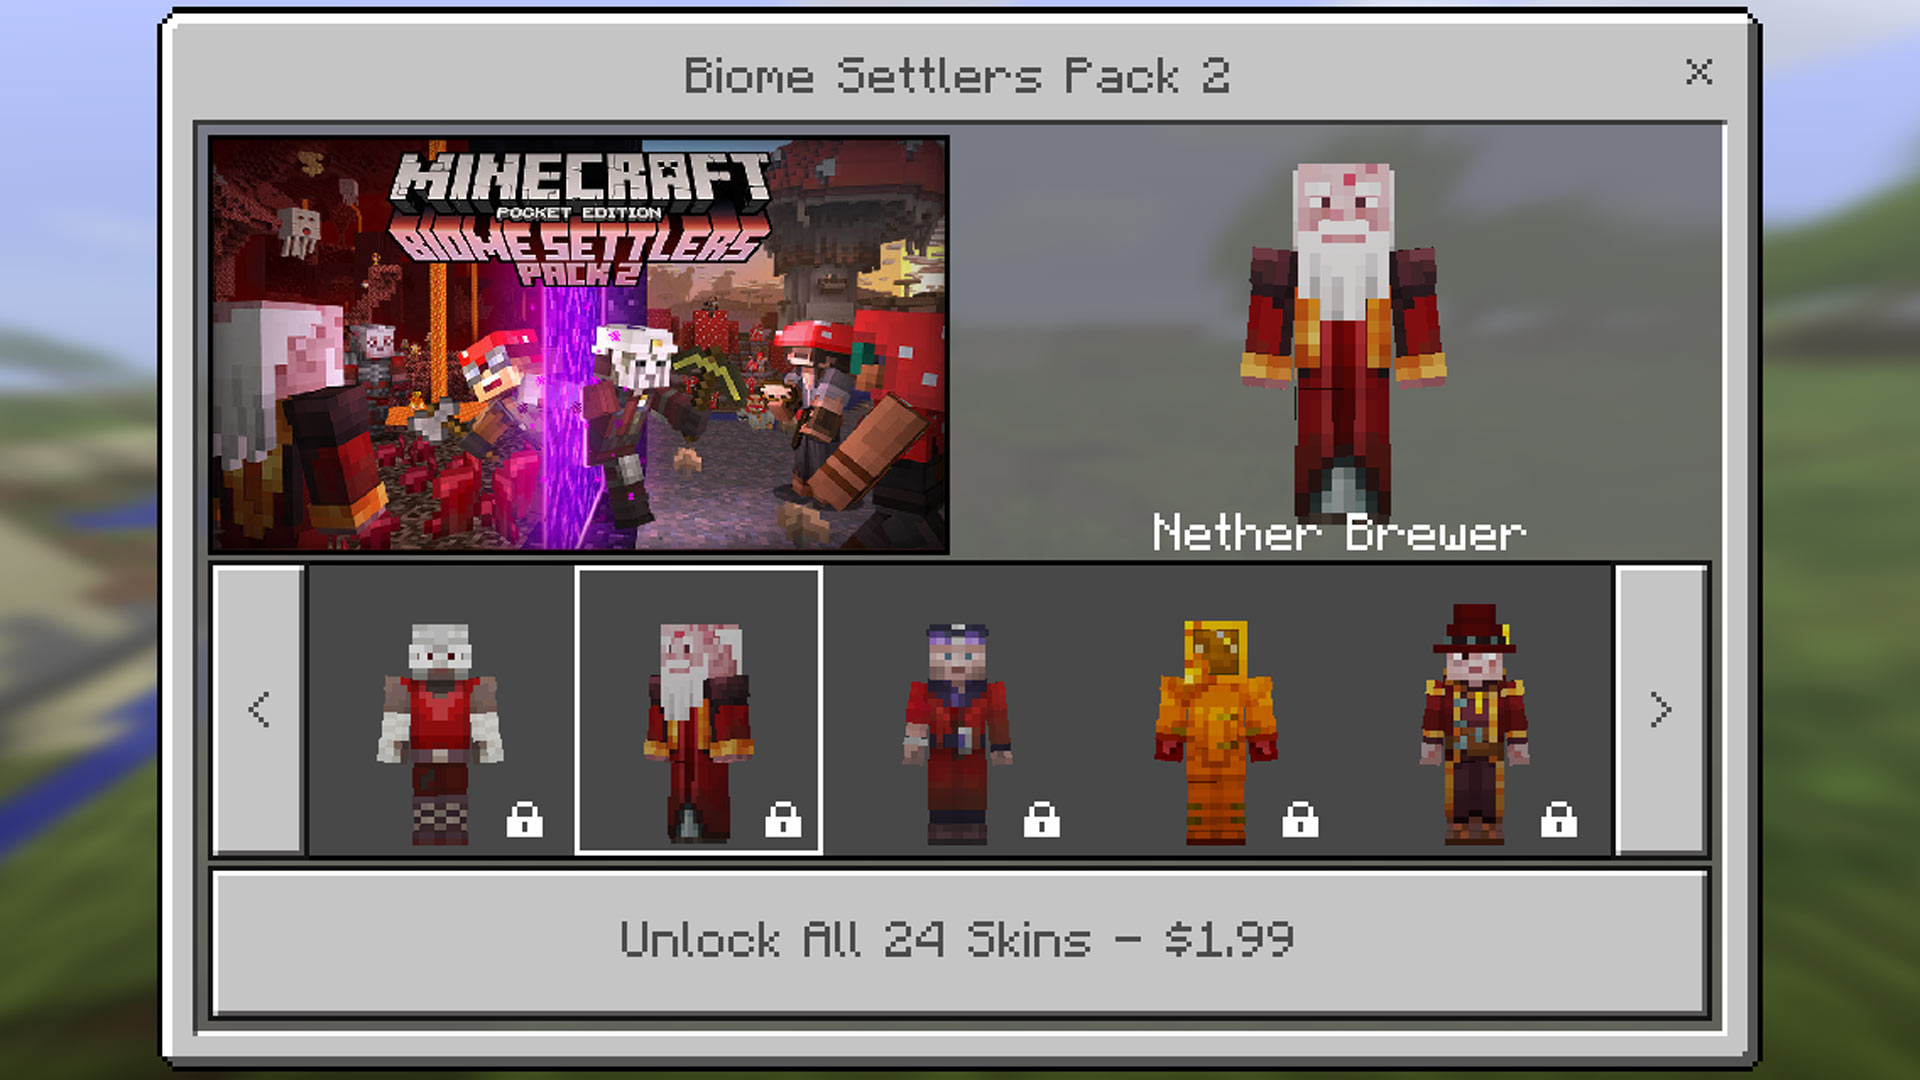 Minecraft Pocket Edition: Biome Settlers Skin Pack 2